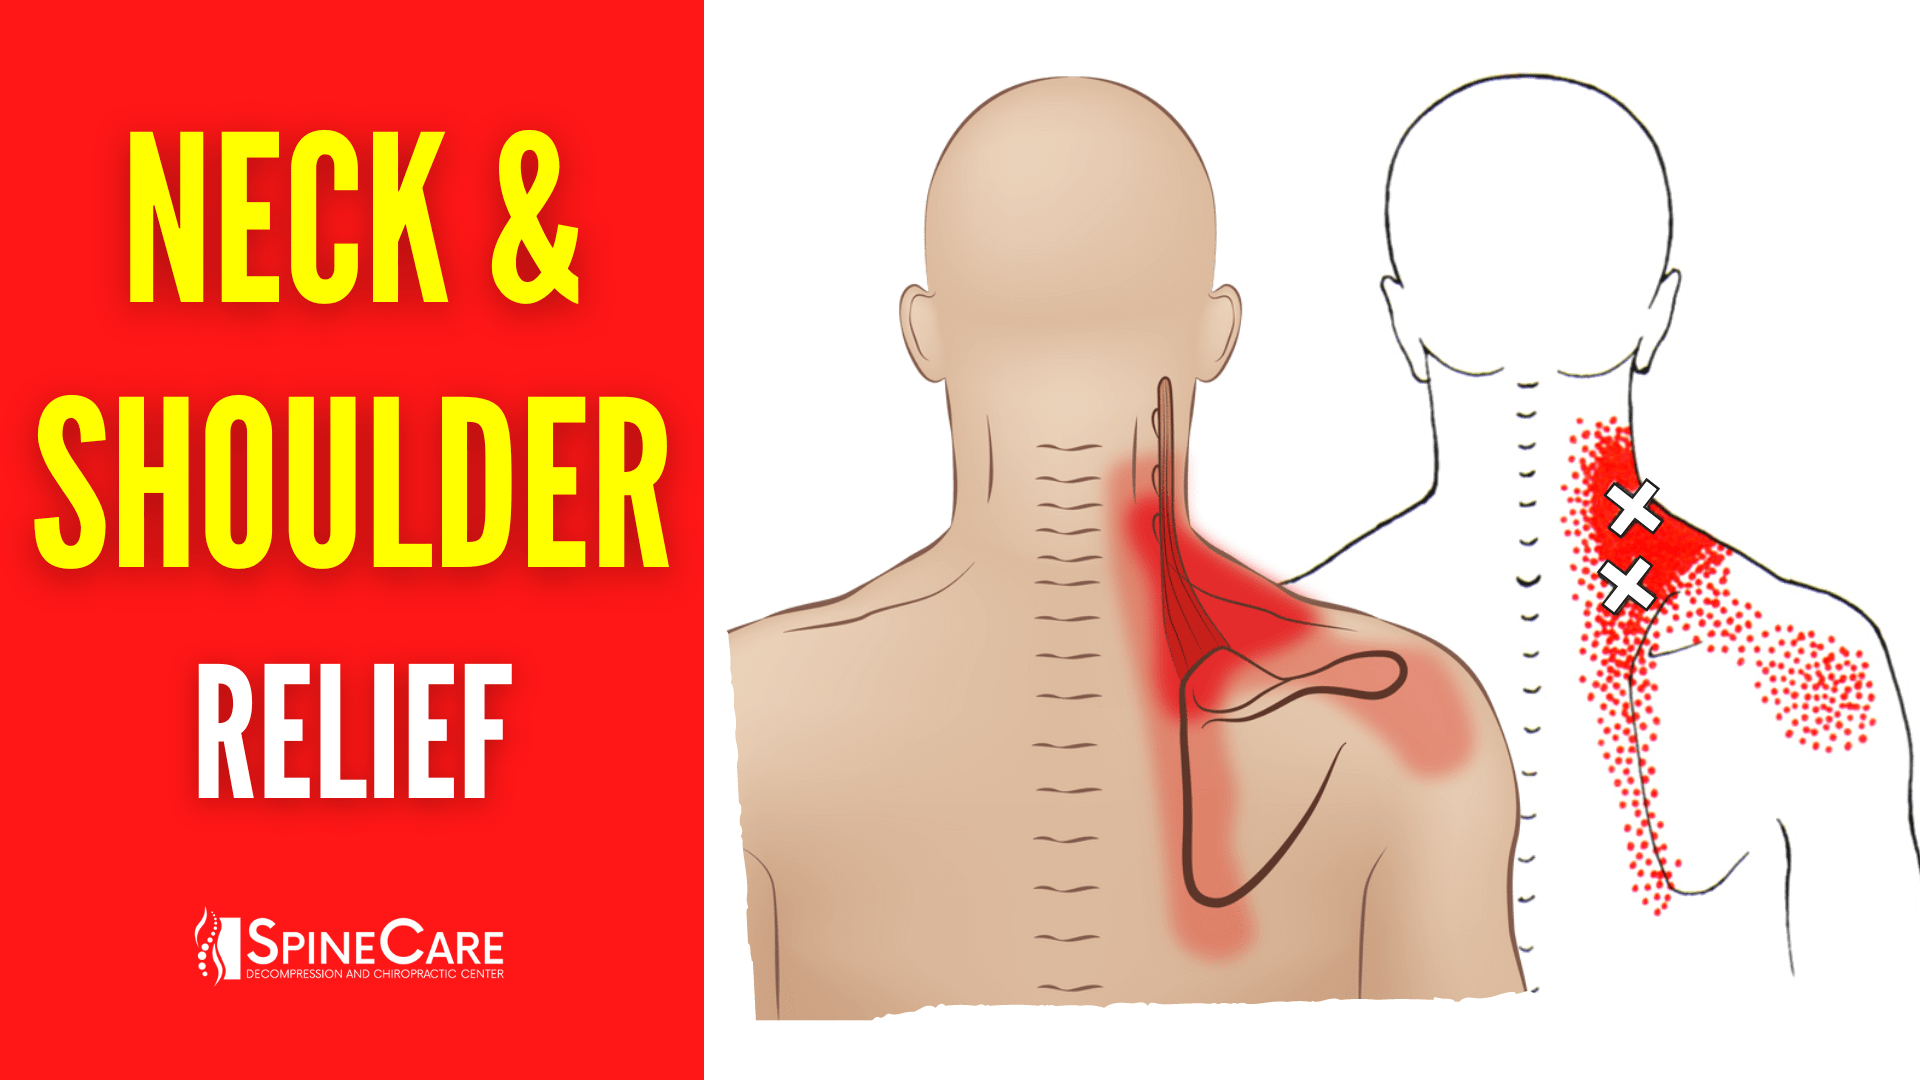 How to Fix Neck and Shoulder Pain FOR GOOD | SpineCare | St. Joseph, Michigan Chiropractor